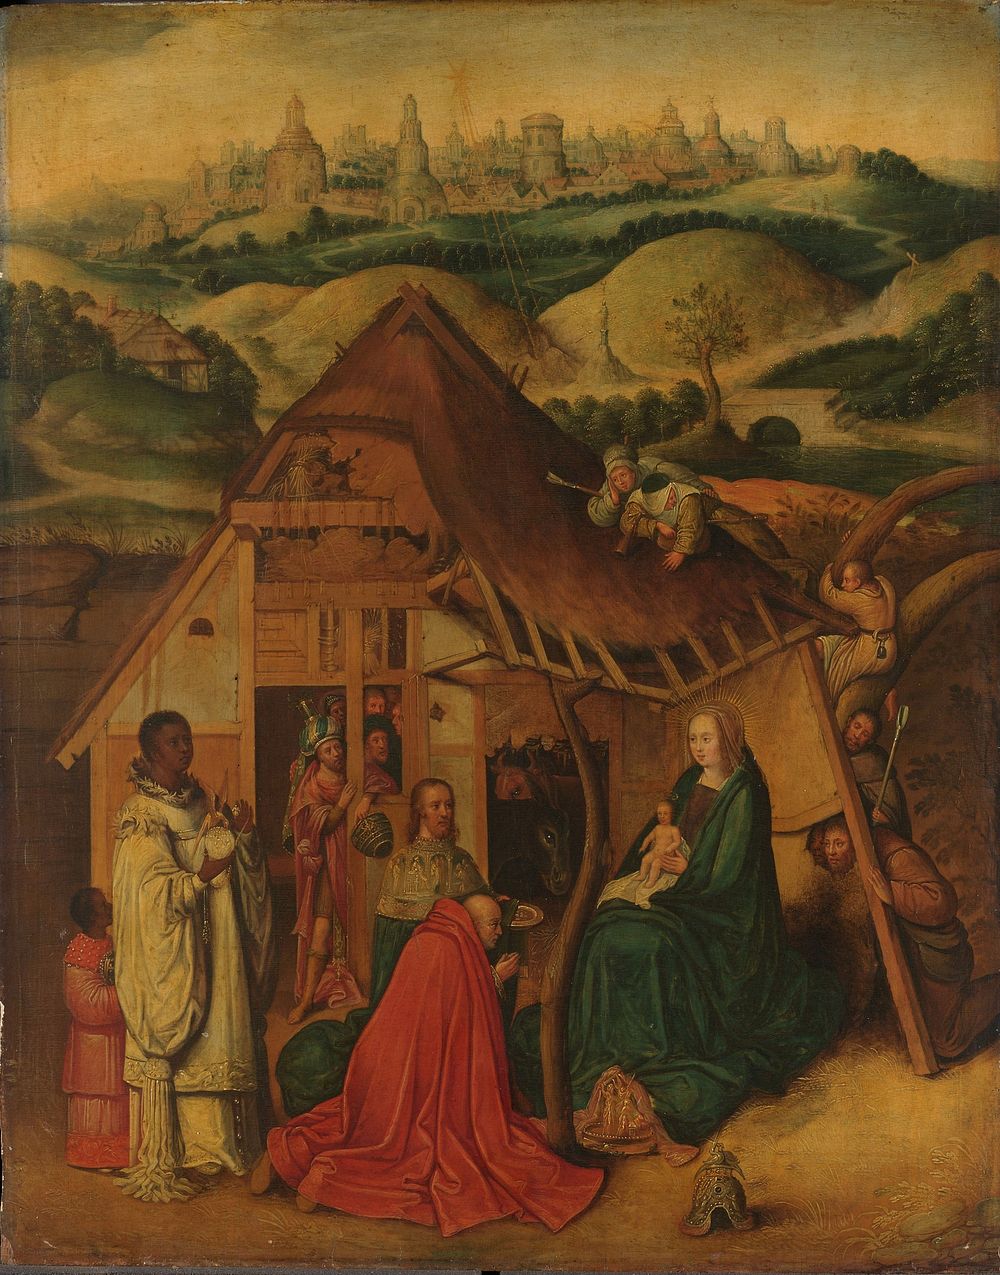 The Adoration of the Magi (c. 1600 - c. 1650) by Jheronimus Bosch